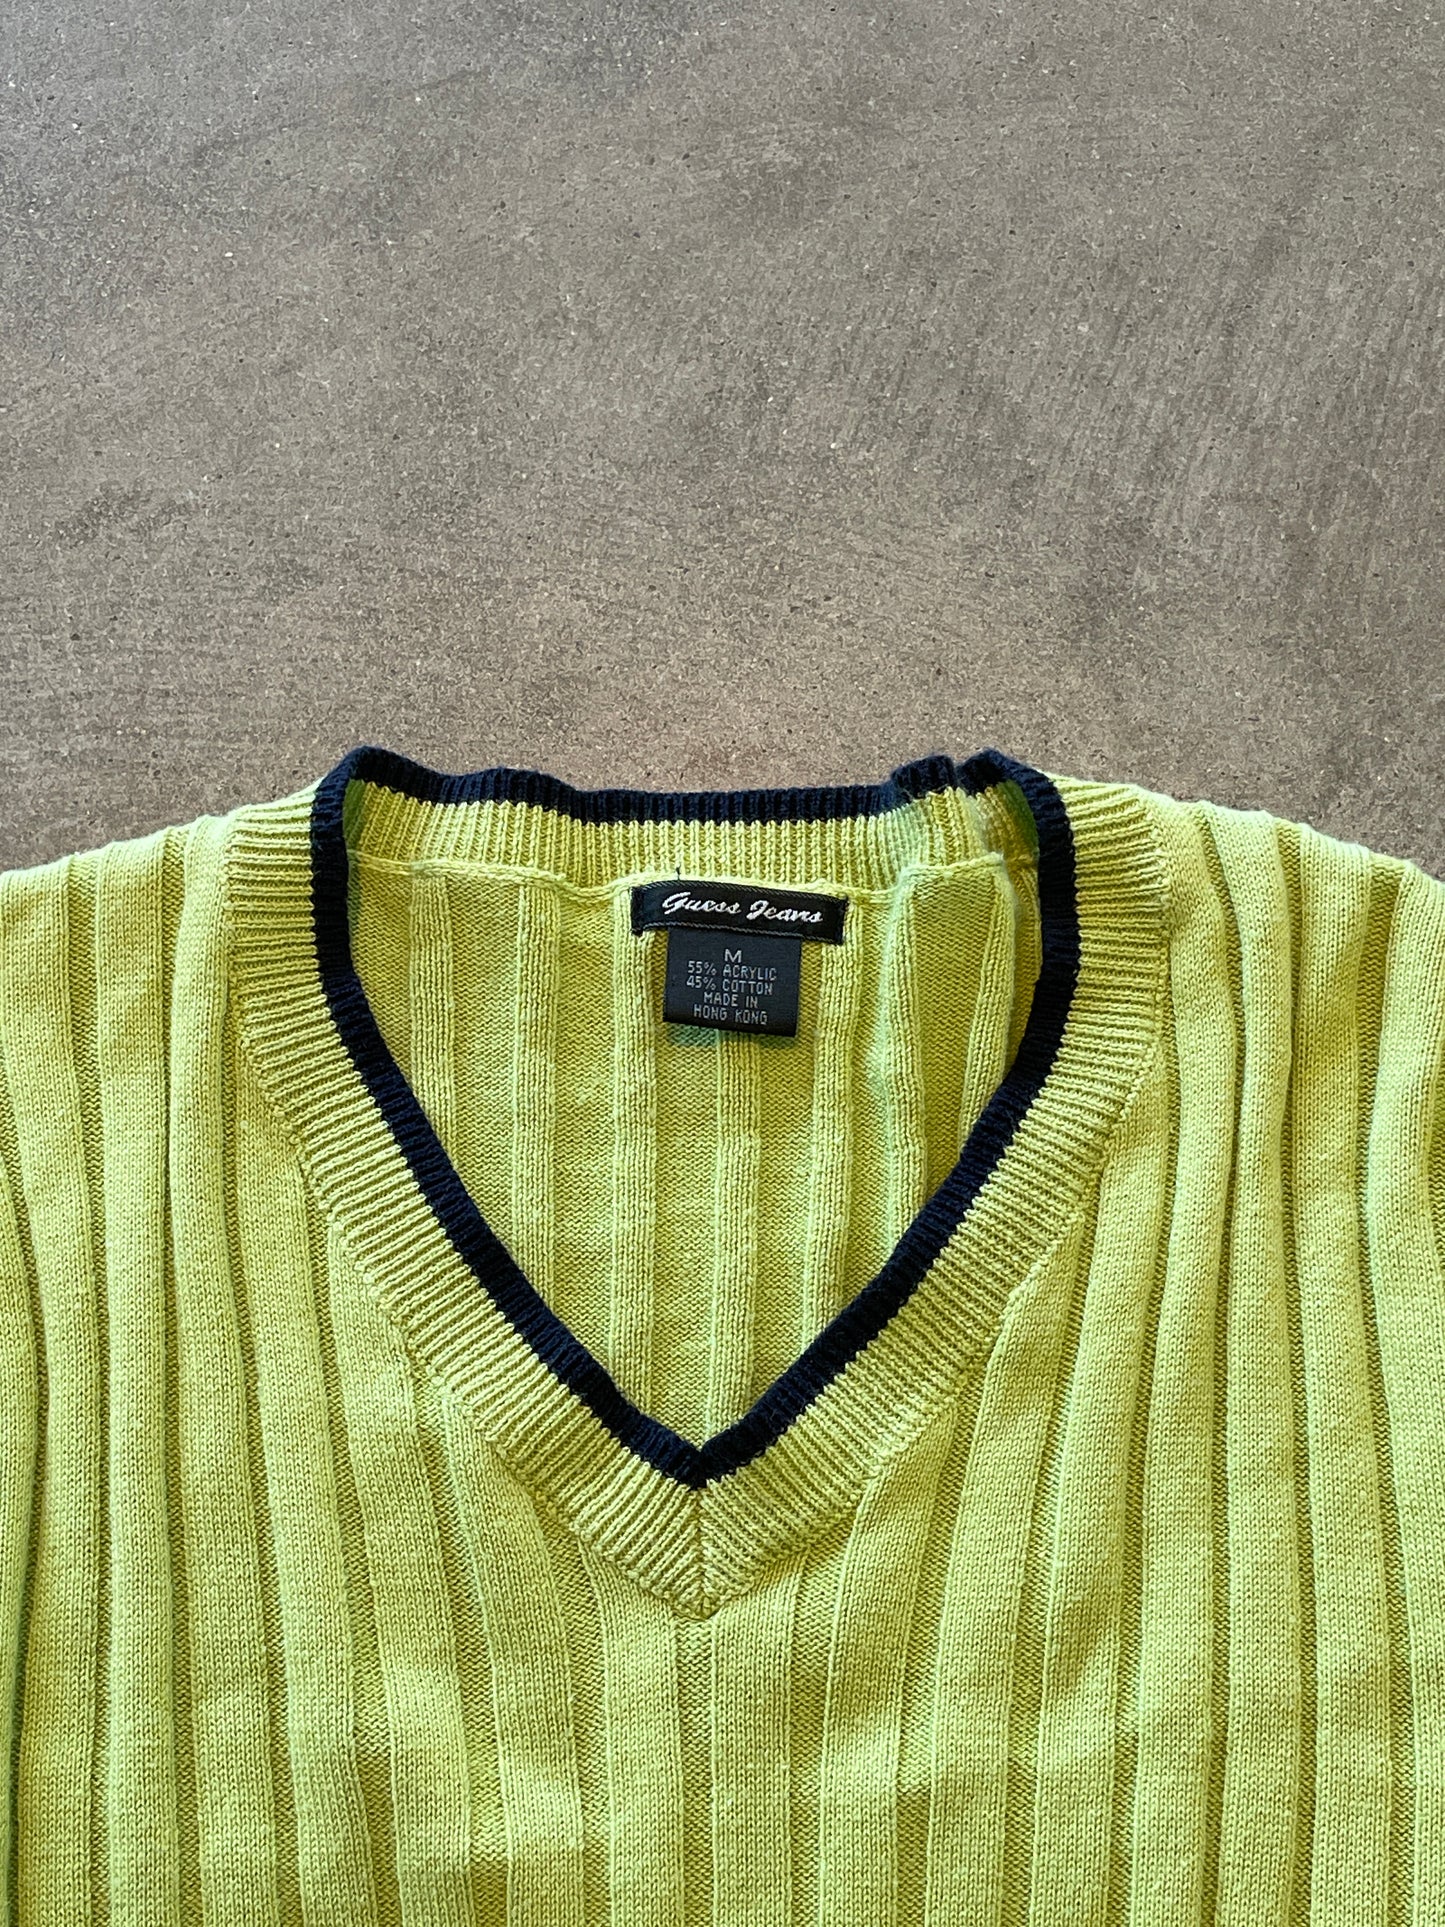 Vintage Guess Sweater - M